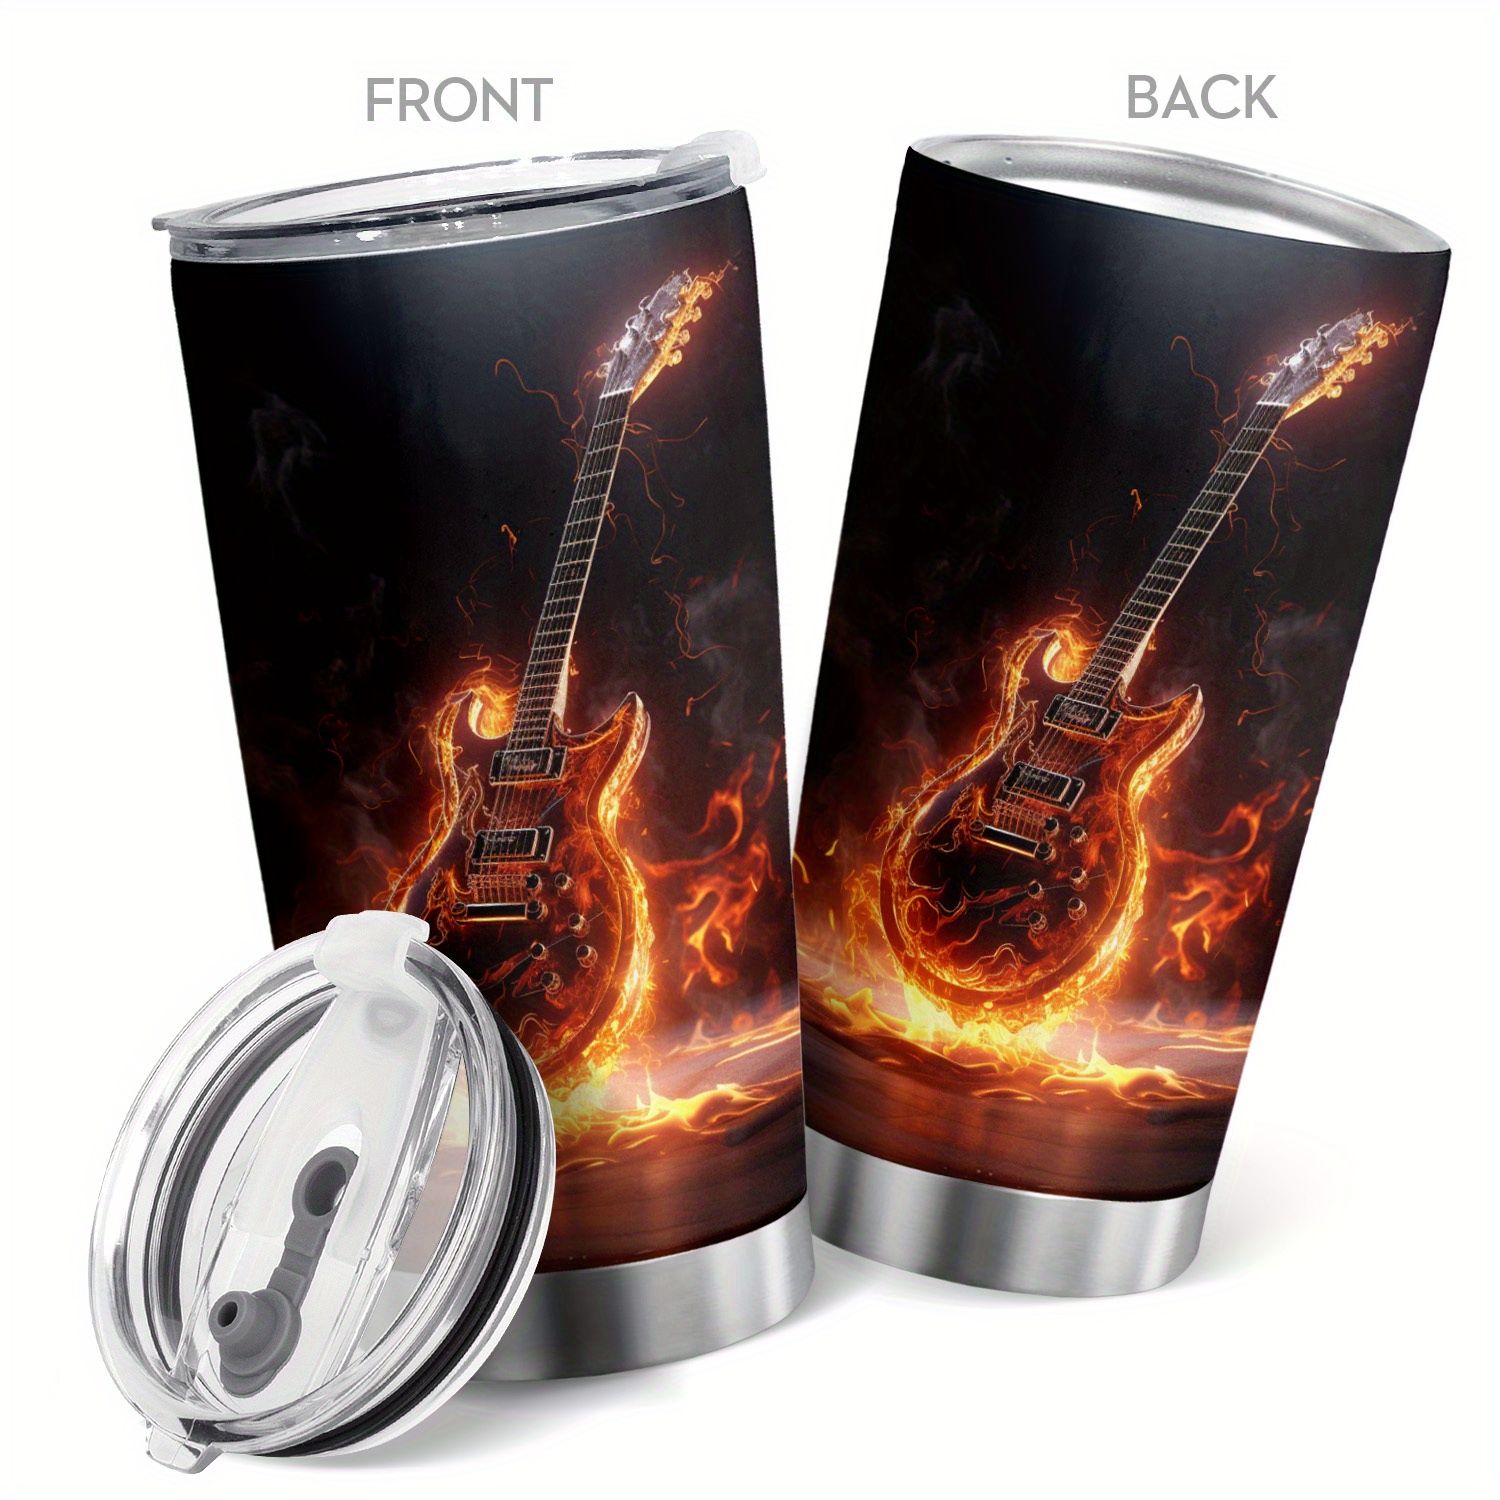 

1pc 20oz Guitar On Fire Travel Mug Tumbler With Lid, Stainless Steel Vacuum Insulated Tumbler, Double Wall Coffee Cup Travel Mug